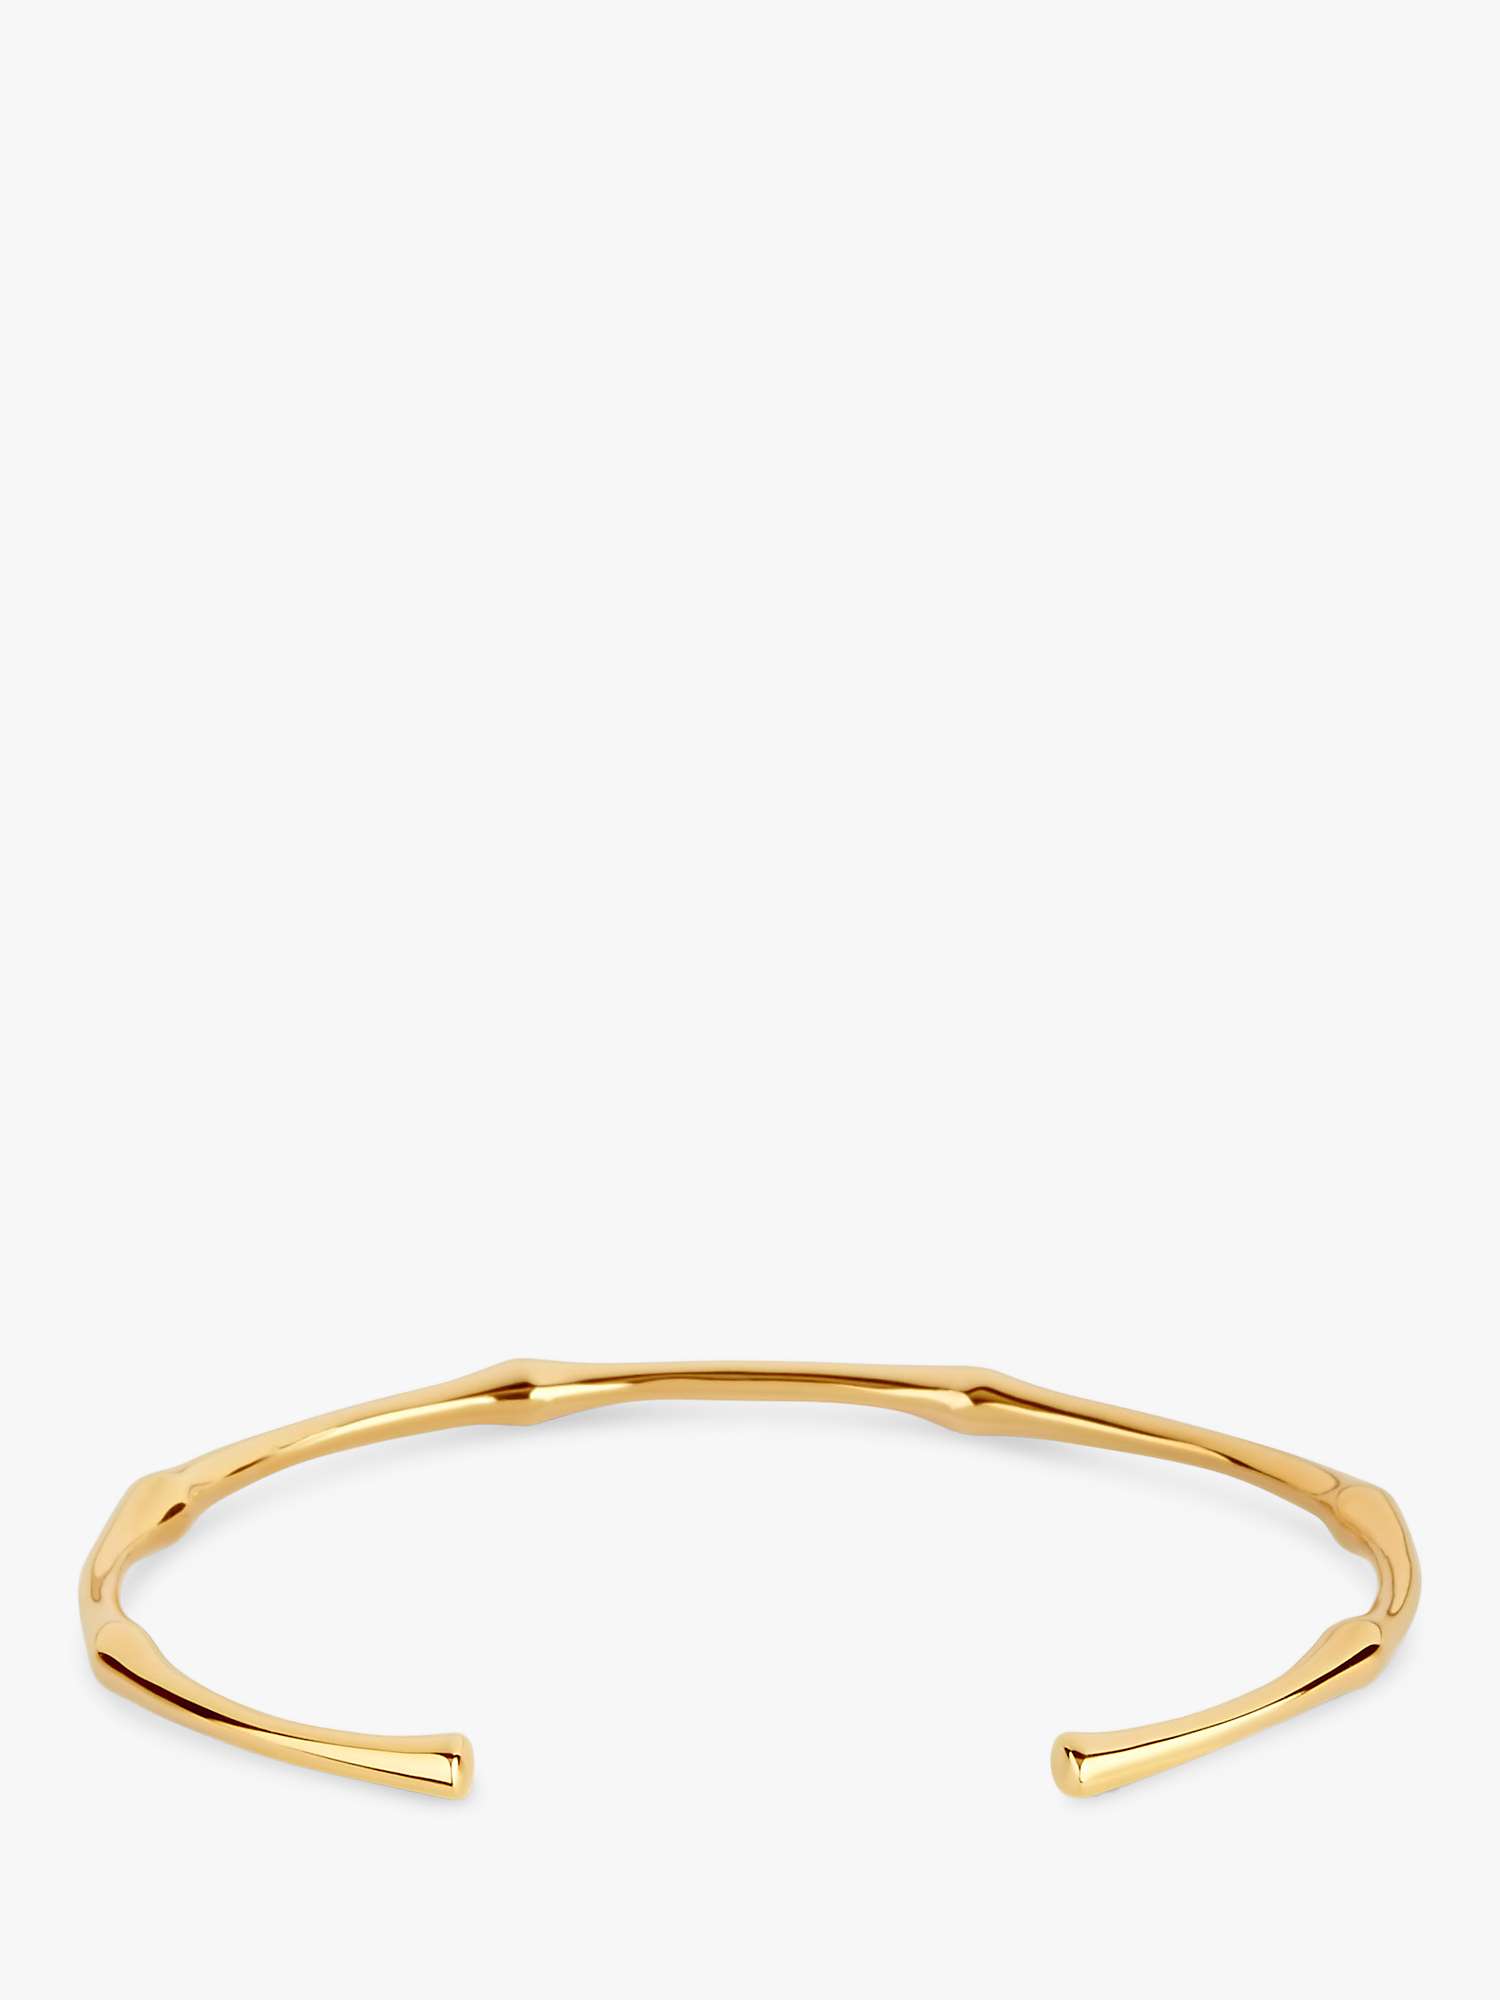 Buy Dinny Hall Bamboo Open End Bangle Online at johnlewis.com